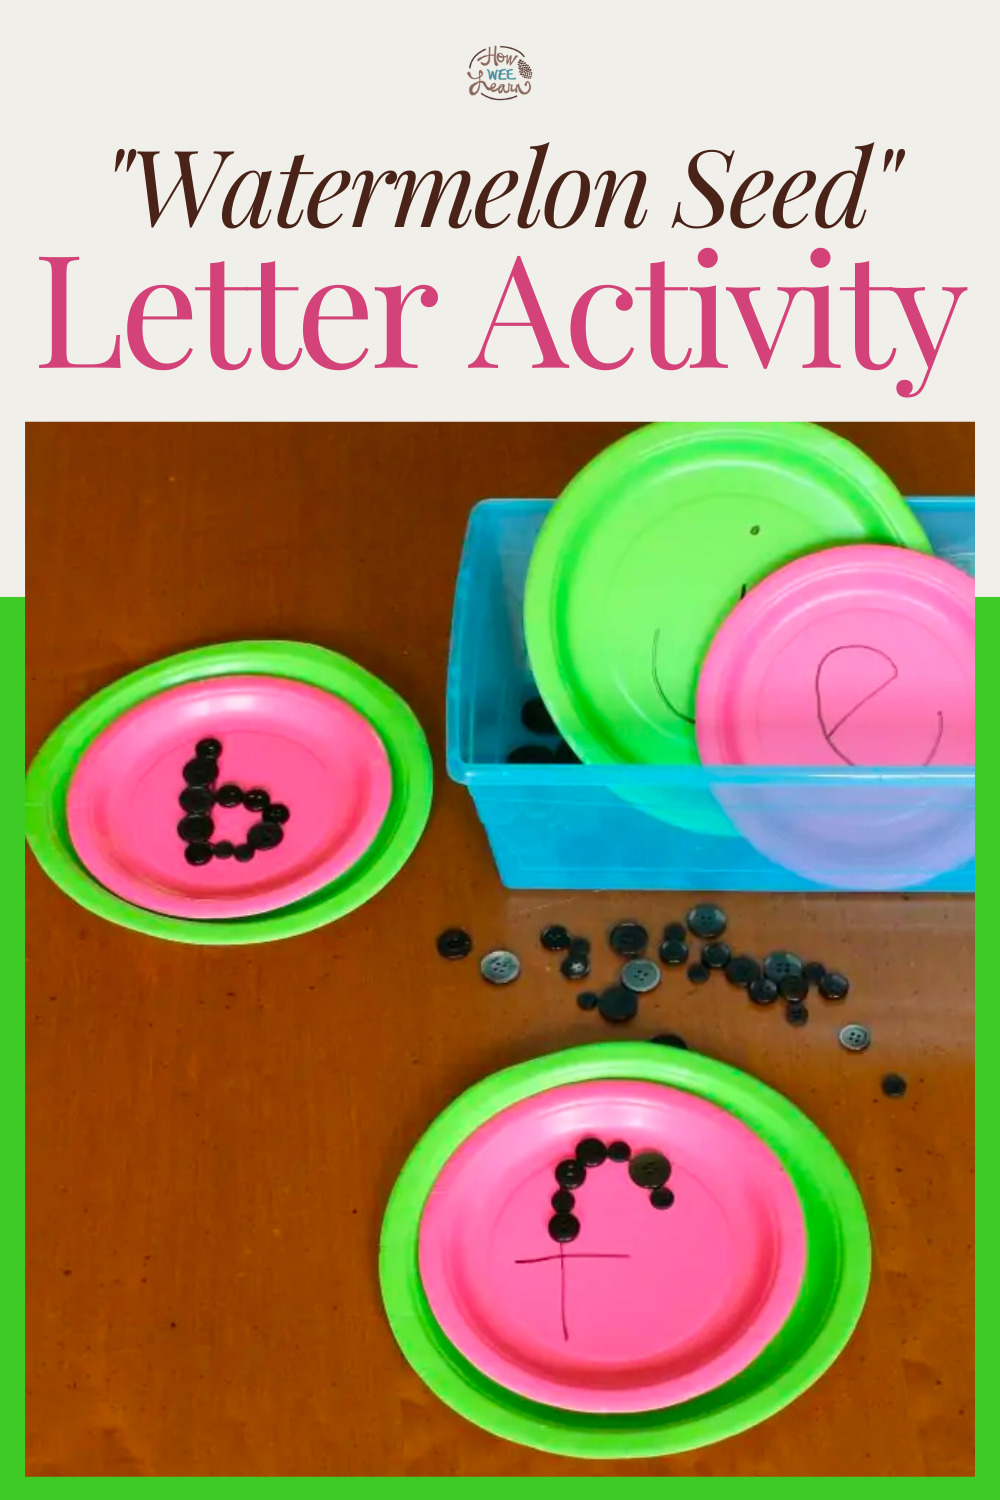 Watermelon Seed Letter Activity